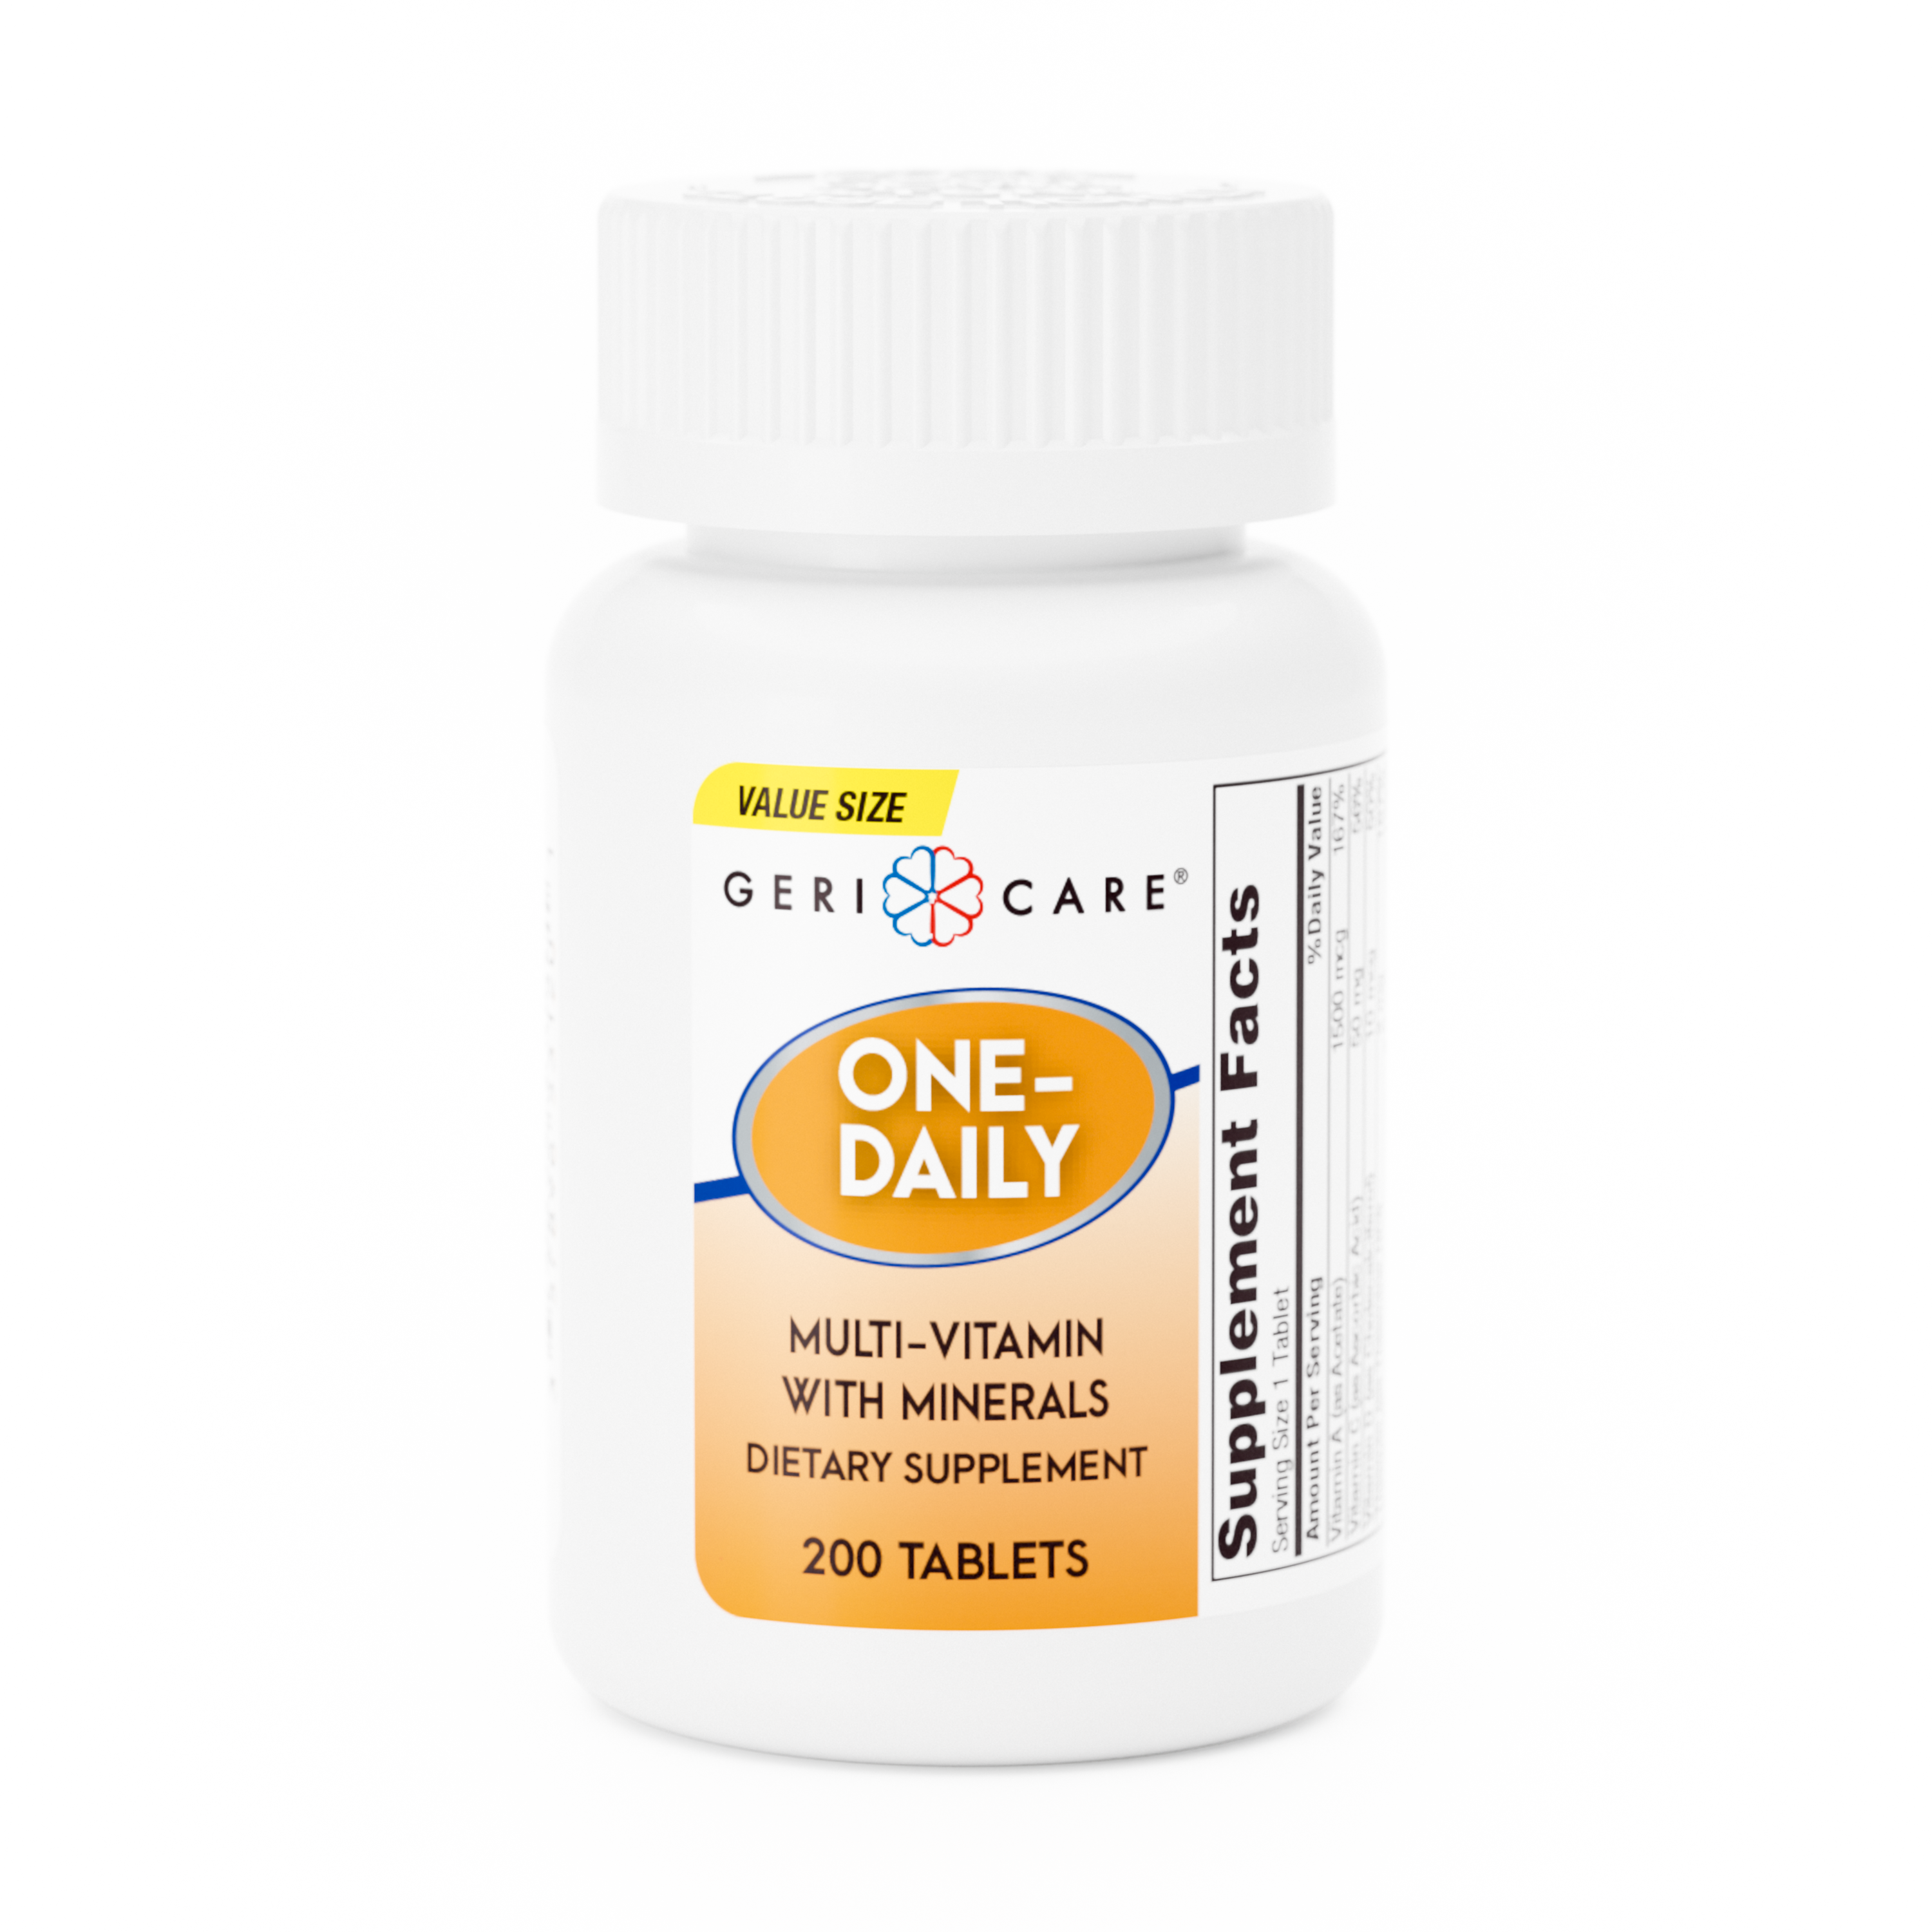 One-Daily Multi-Vitamin + Minerals – 200 Tablets